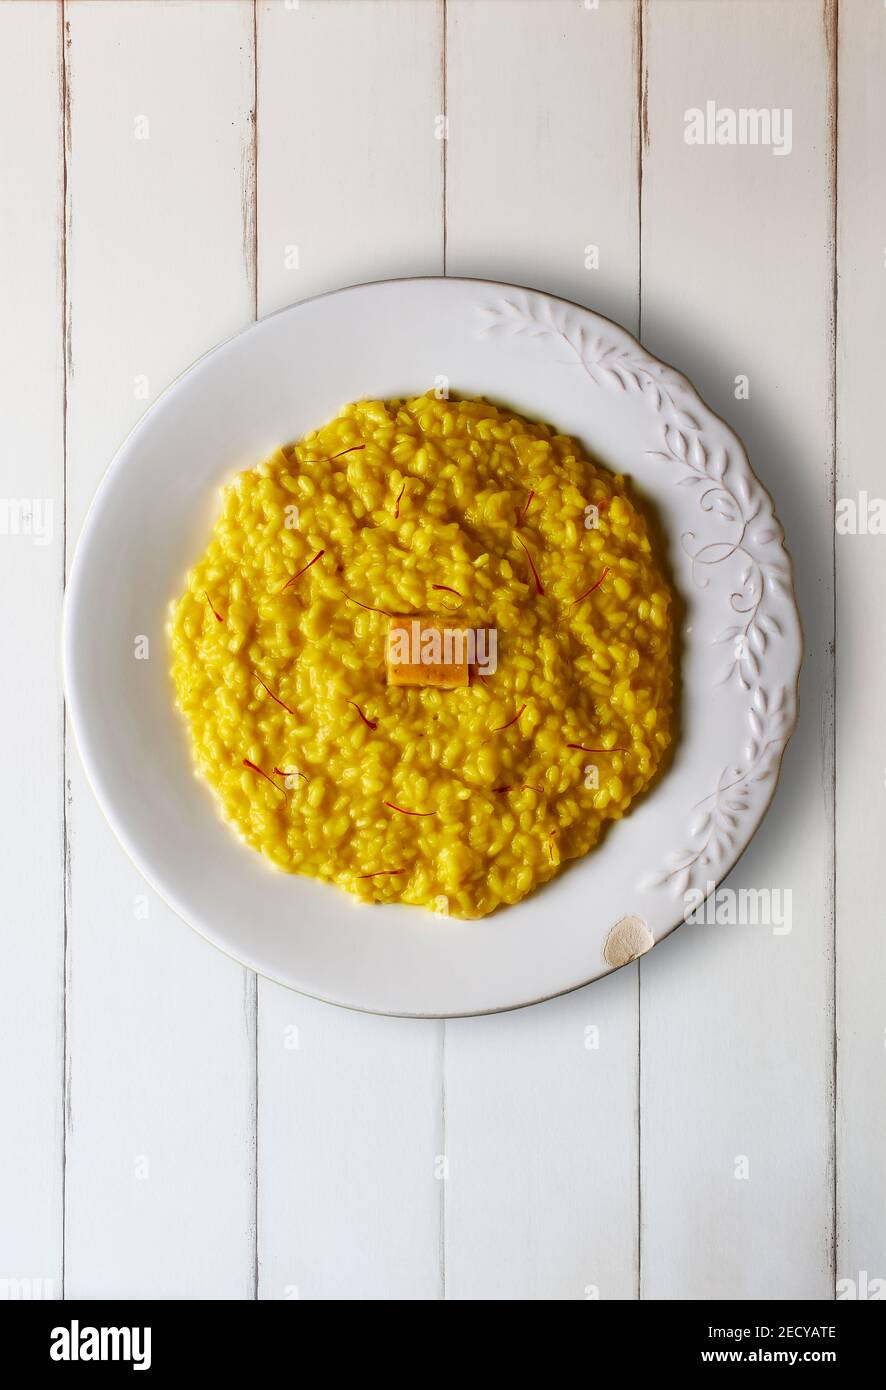 Risotto alla Milanese dressed with saffron threads and a Parmigiano Reggiano cheese rind on a white wooden table. Italian cuisine. Stock Photo